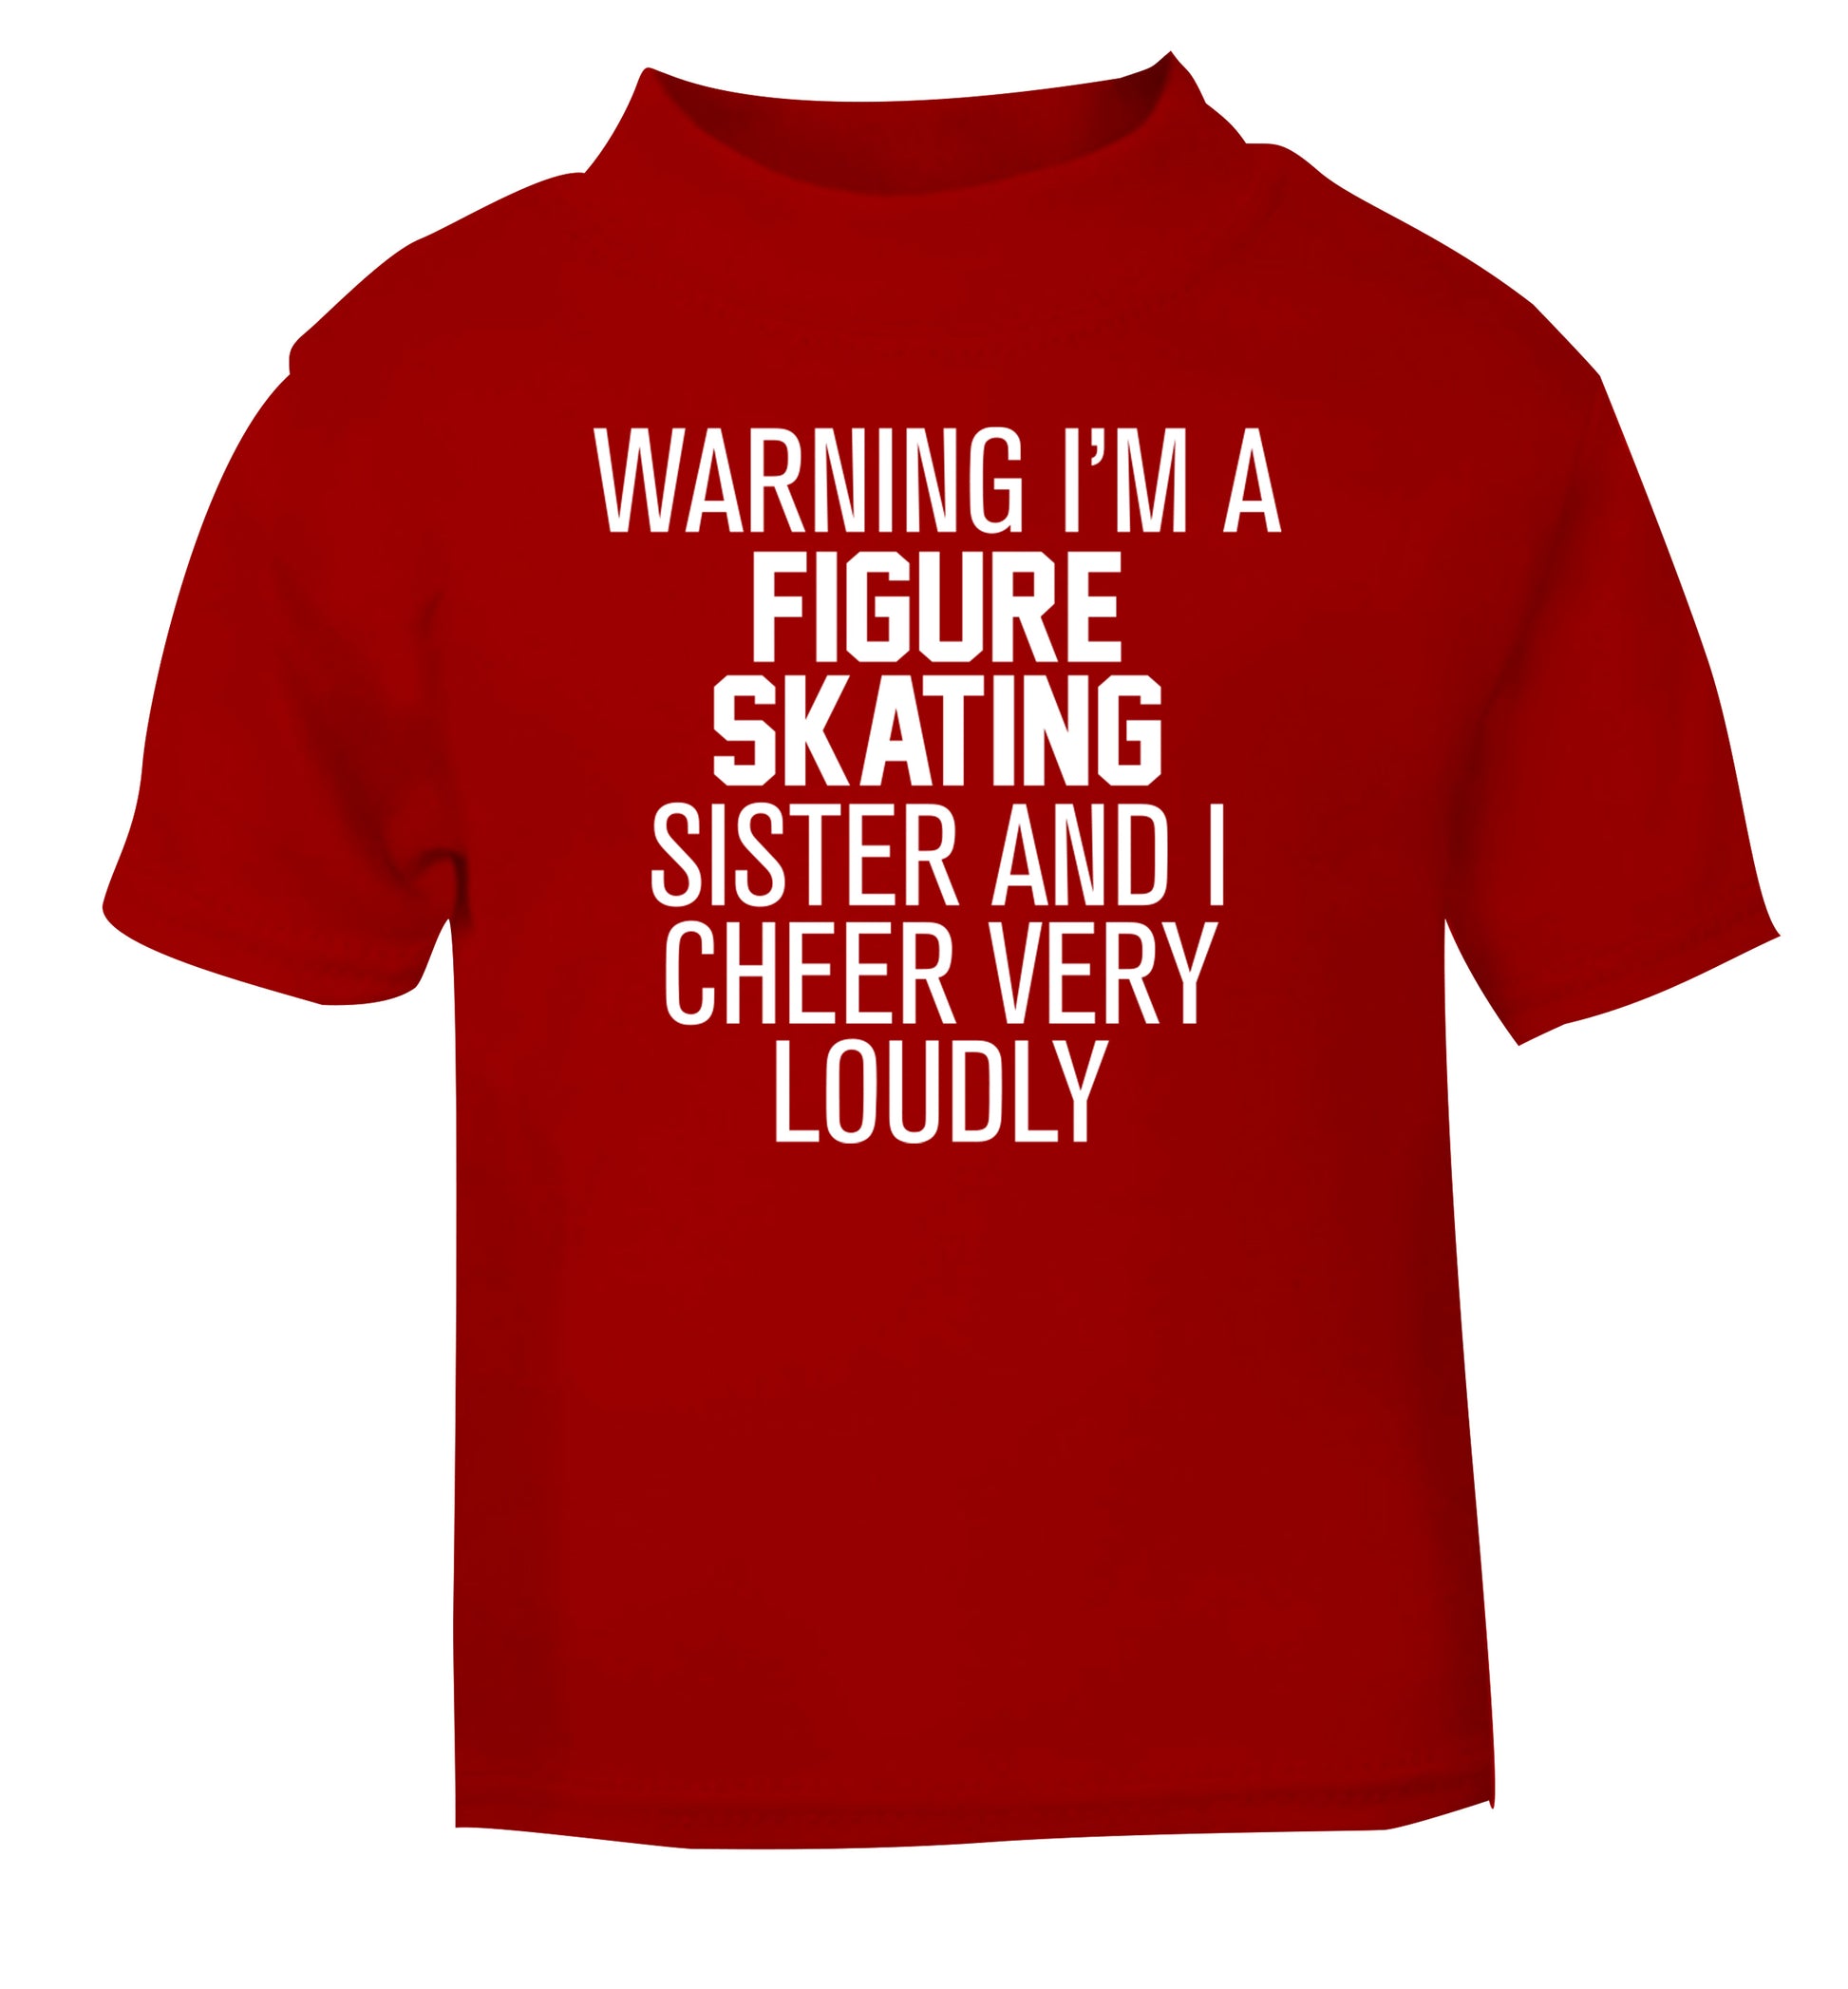 Warning I'm a figure skating sister and I cheer very loudly red Baby Toddler Tshirt 2 Years